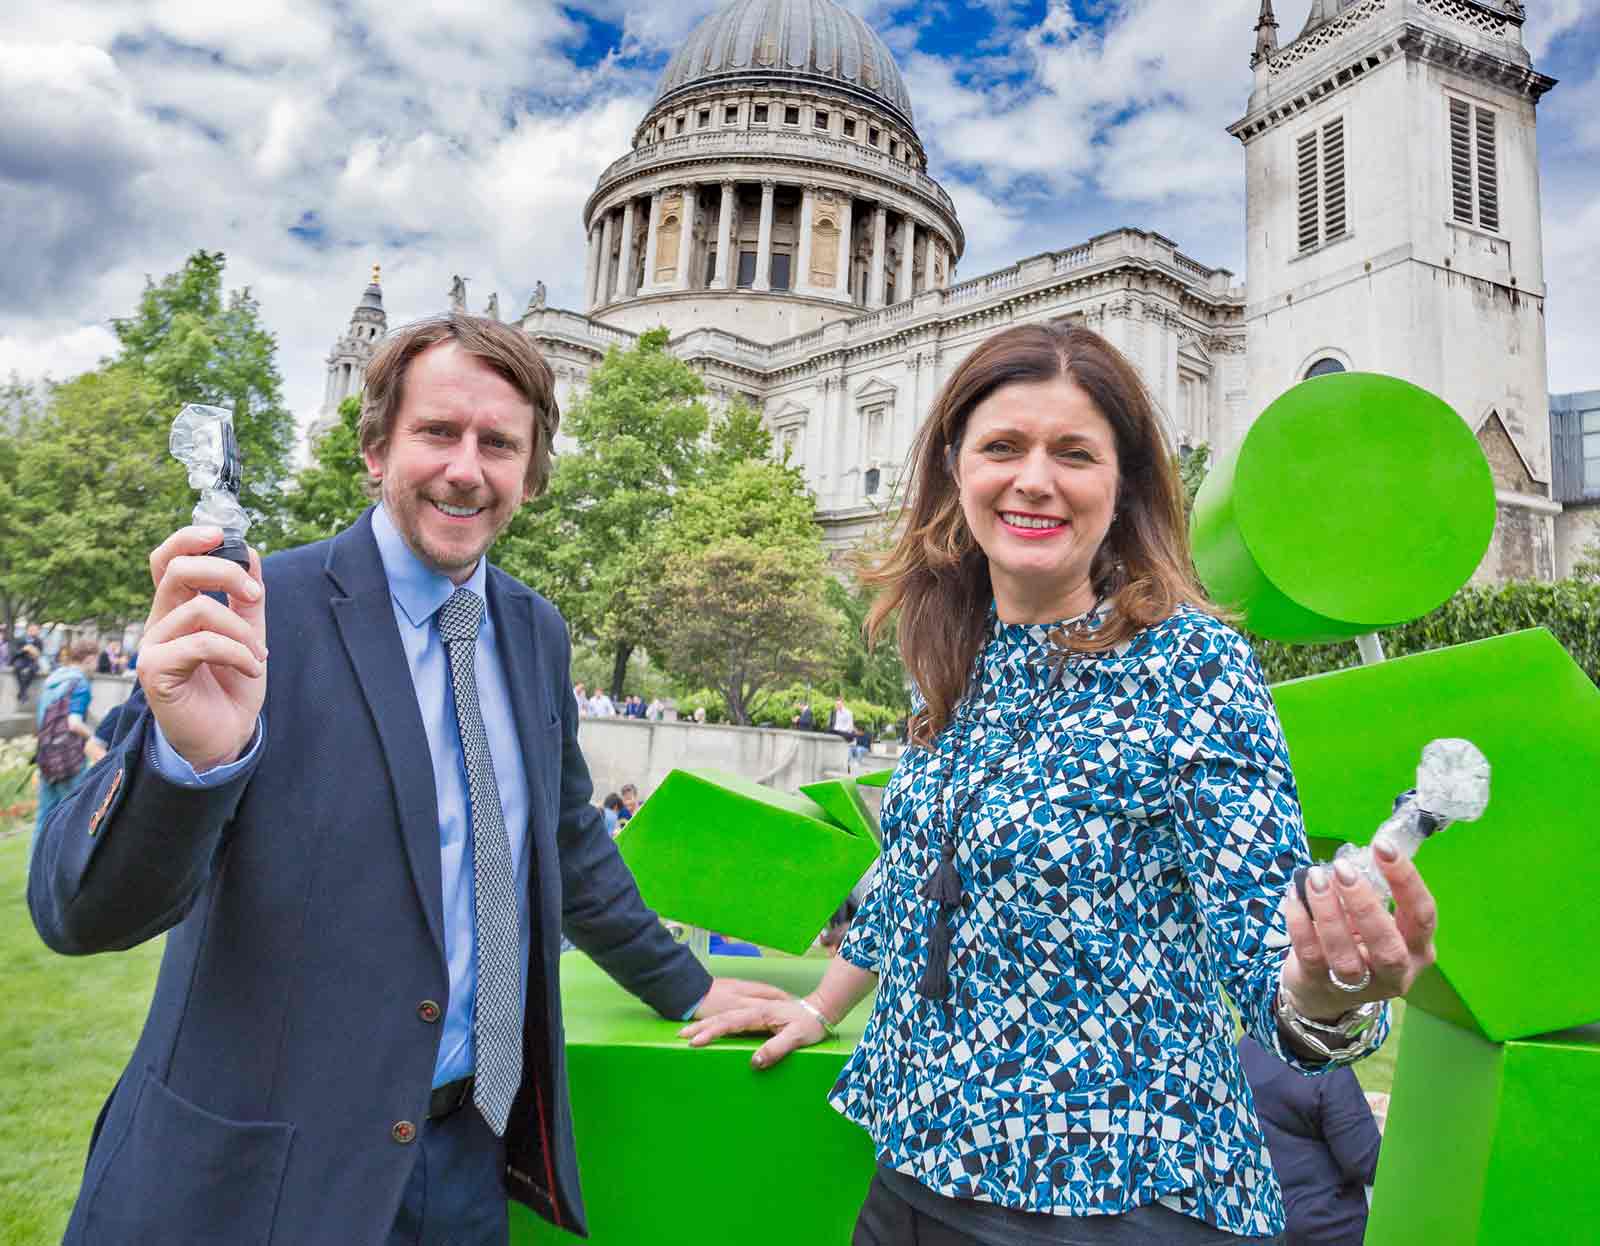 Keep Britain Tidy CEO Allison Ogden-Newton and Harrogate Water MD James Cain demonstrate just how small a plastic water bottle can shrink in size